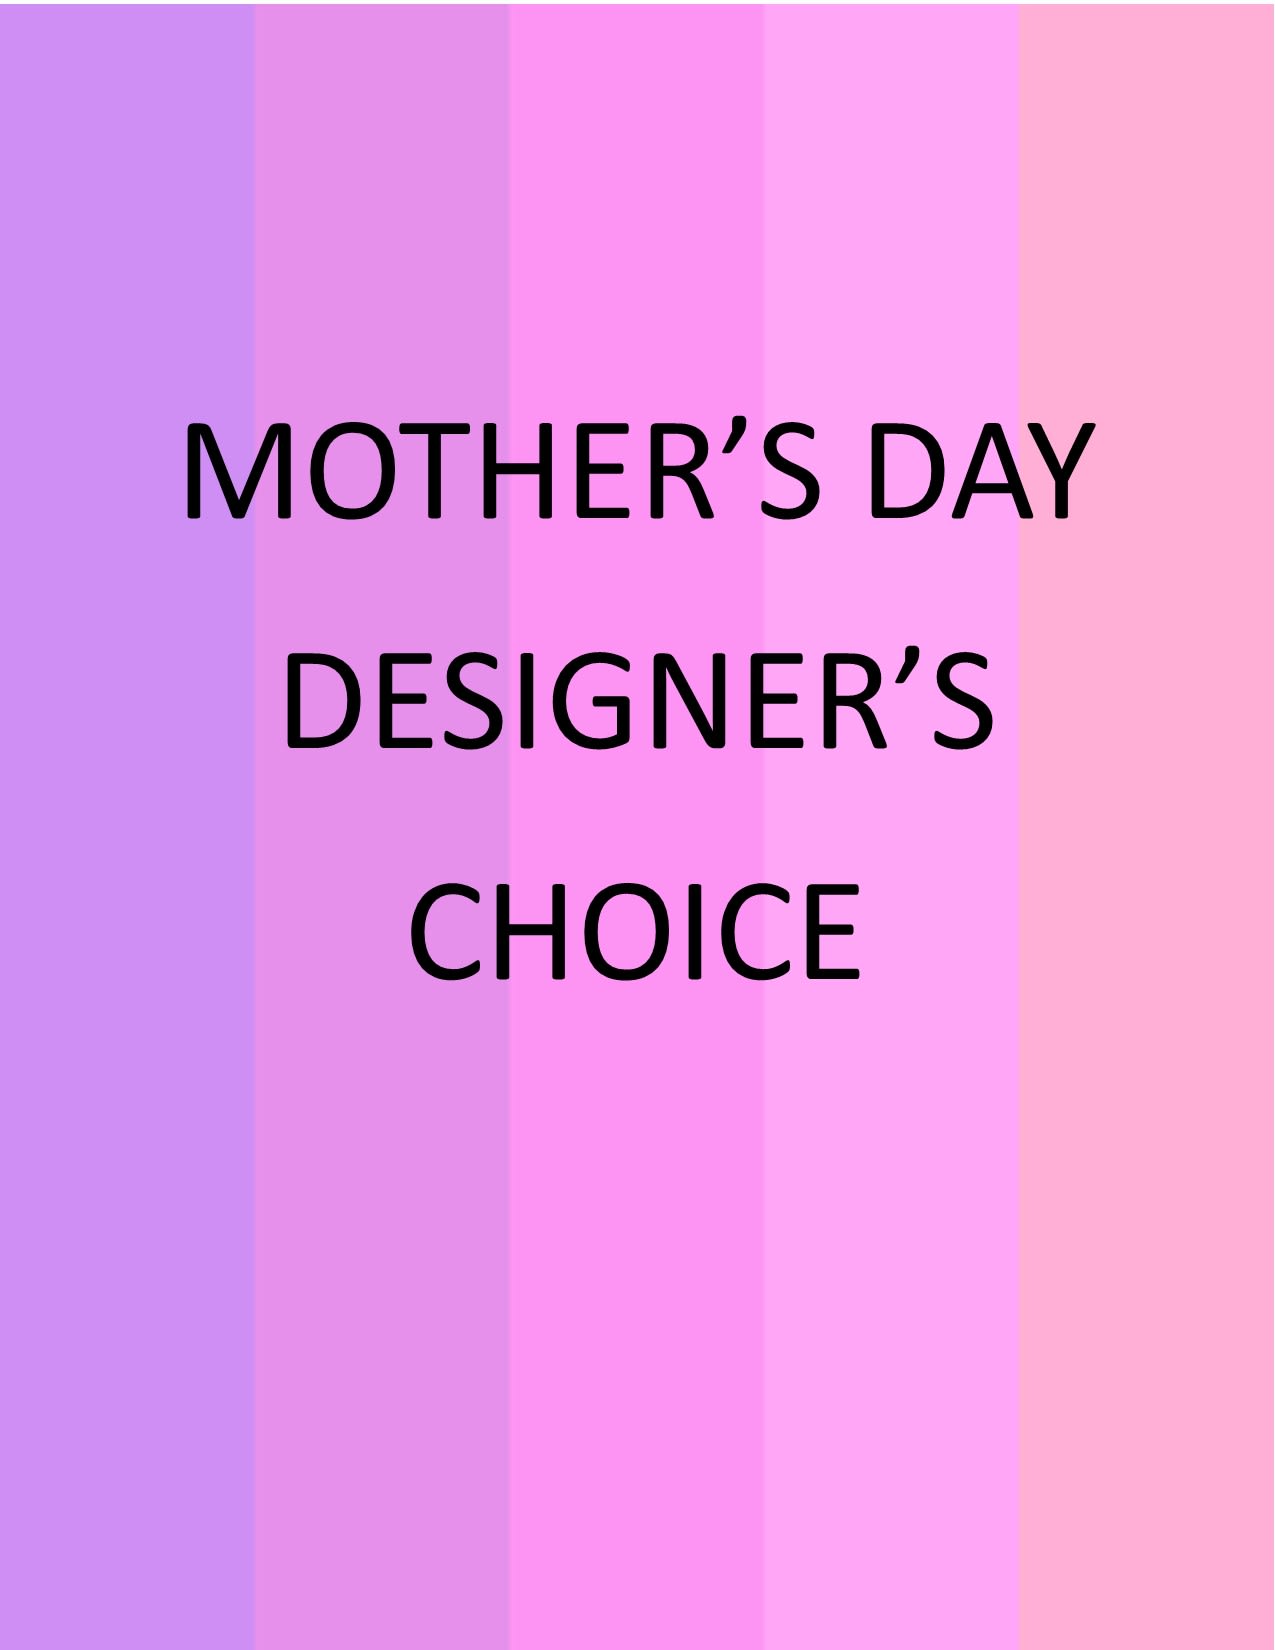 Mother's Day Designer's Choice - A bouquet full of light pinks, hot pinks, lavenders, and deep purples. We have tons of beautiful seasonal flowers blooming this spring that we would love to use in your arrangement! Please let us create something beautiful for you.